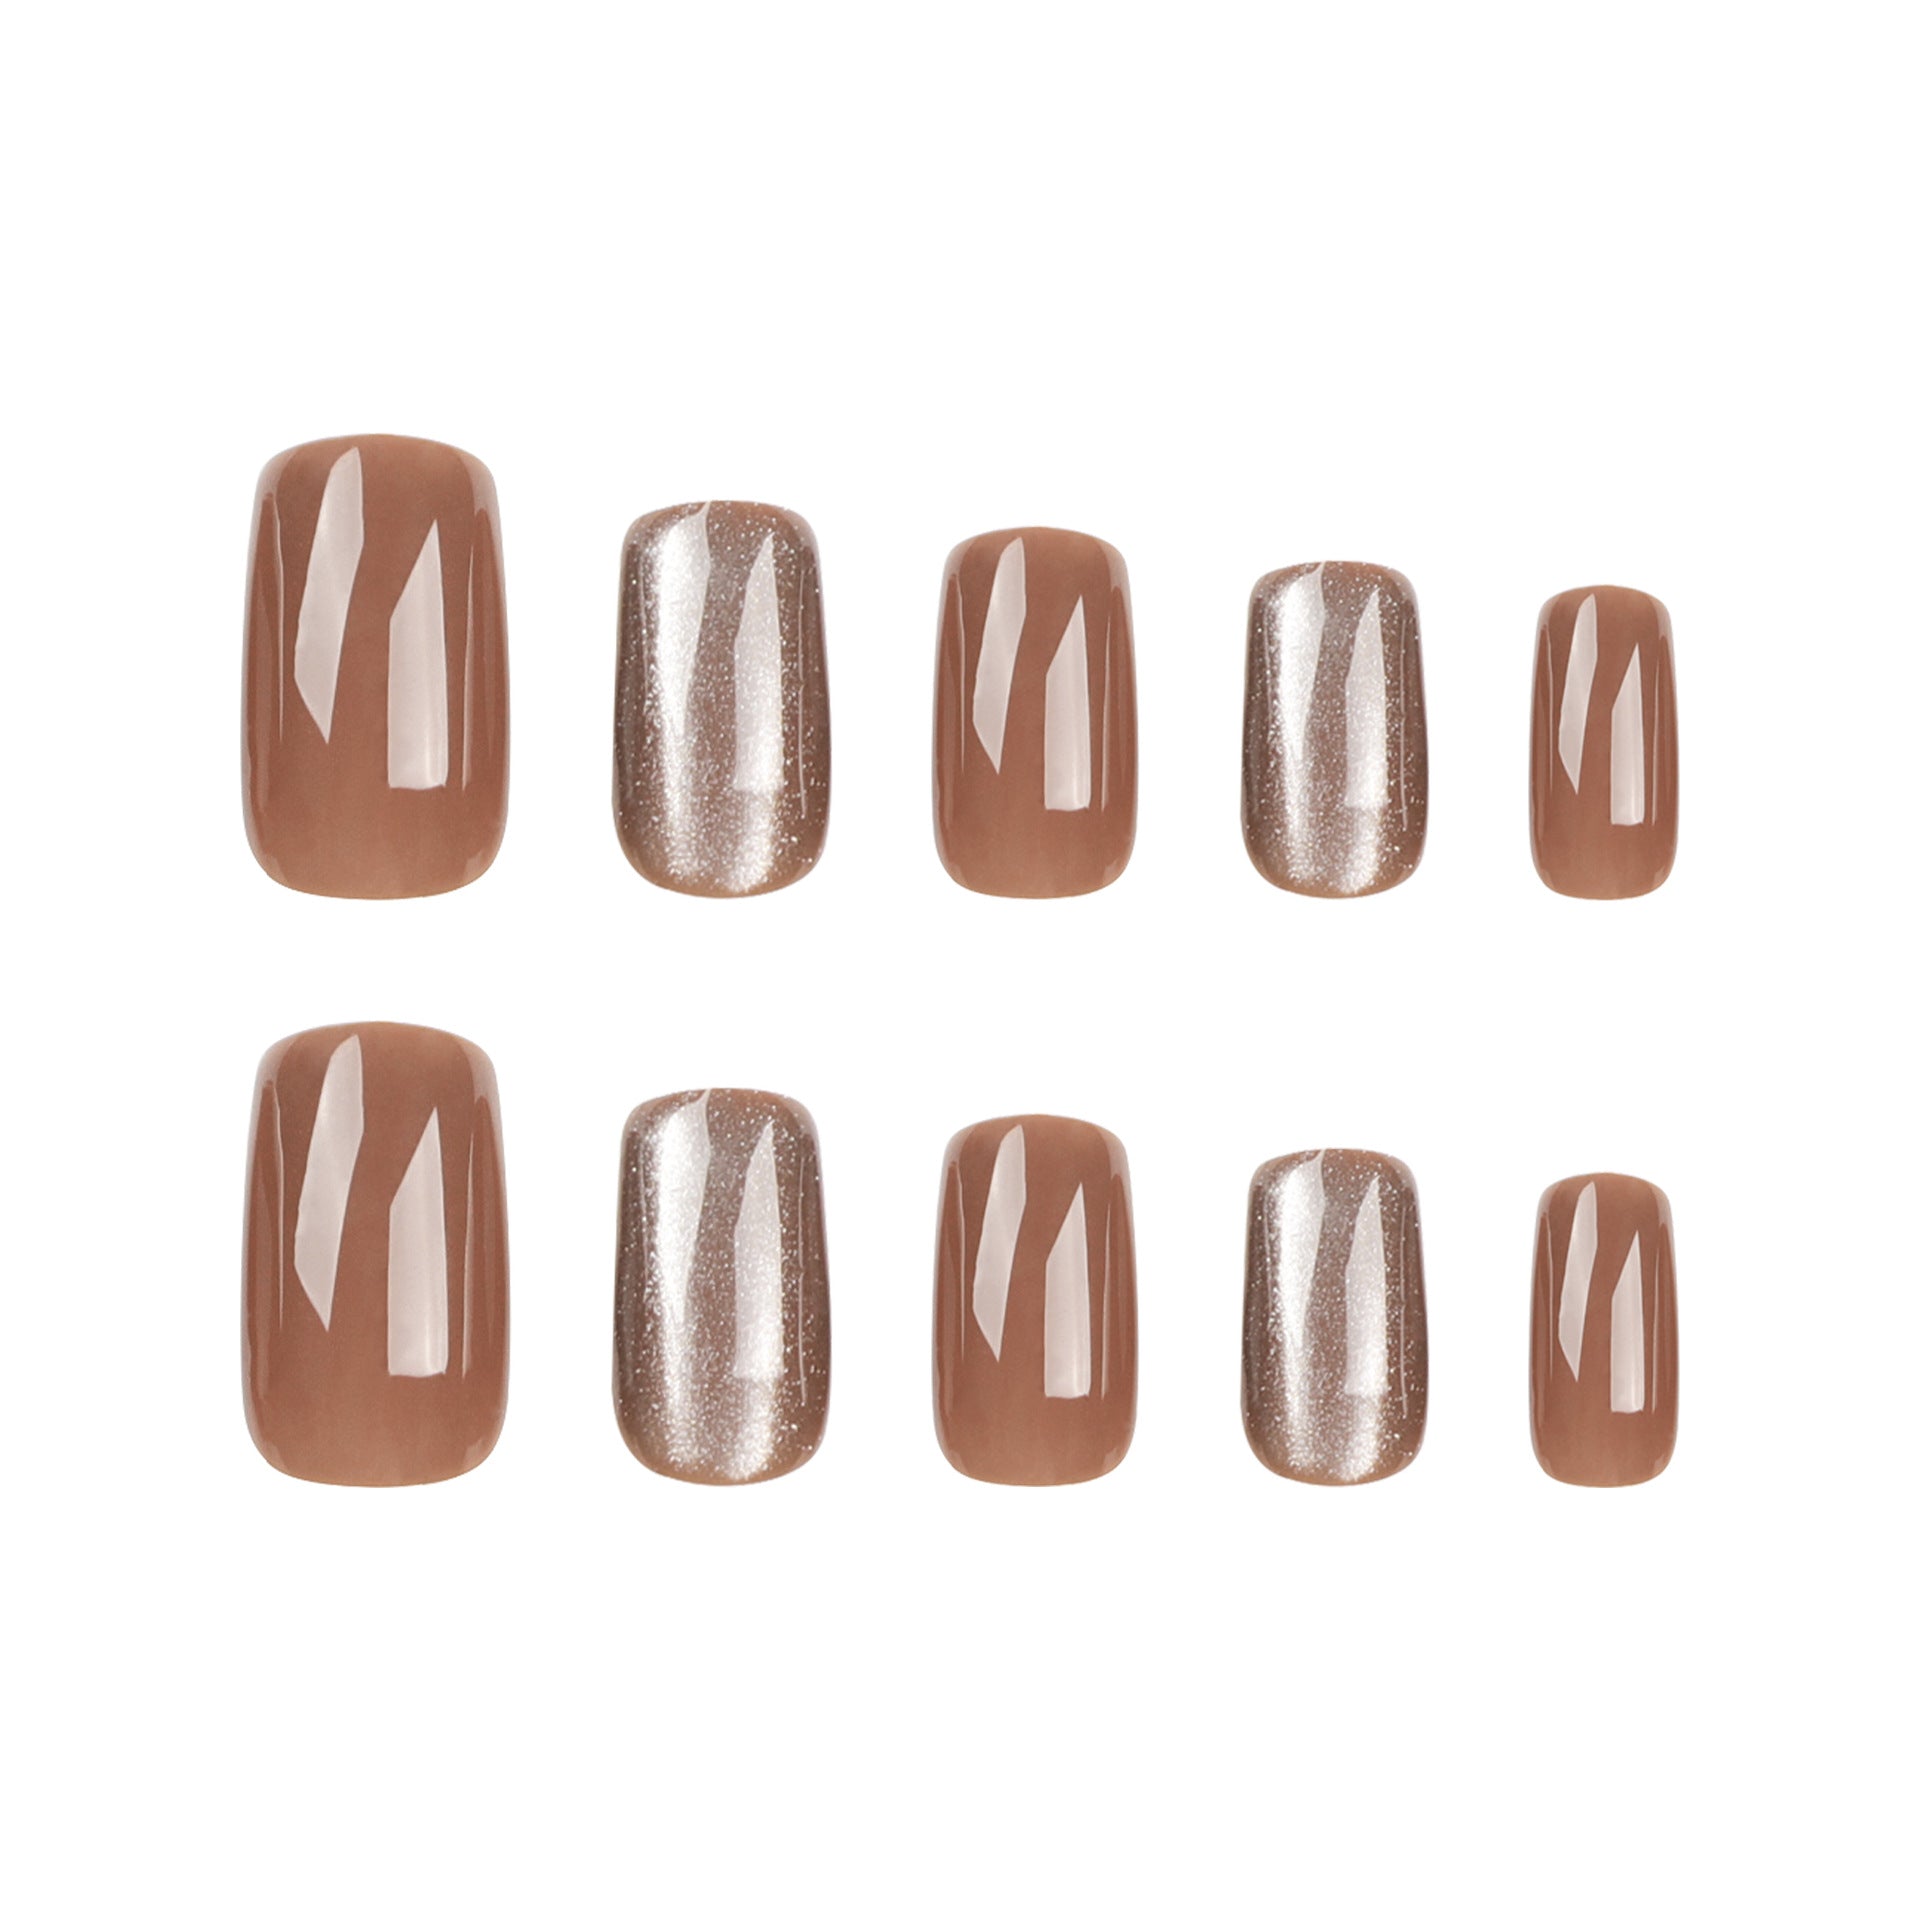 Women's Square Nails | Square Press on Nails | Galspro